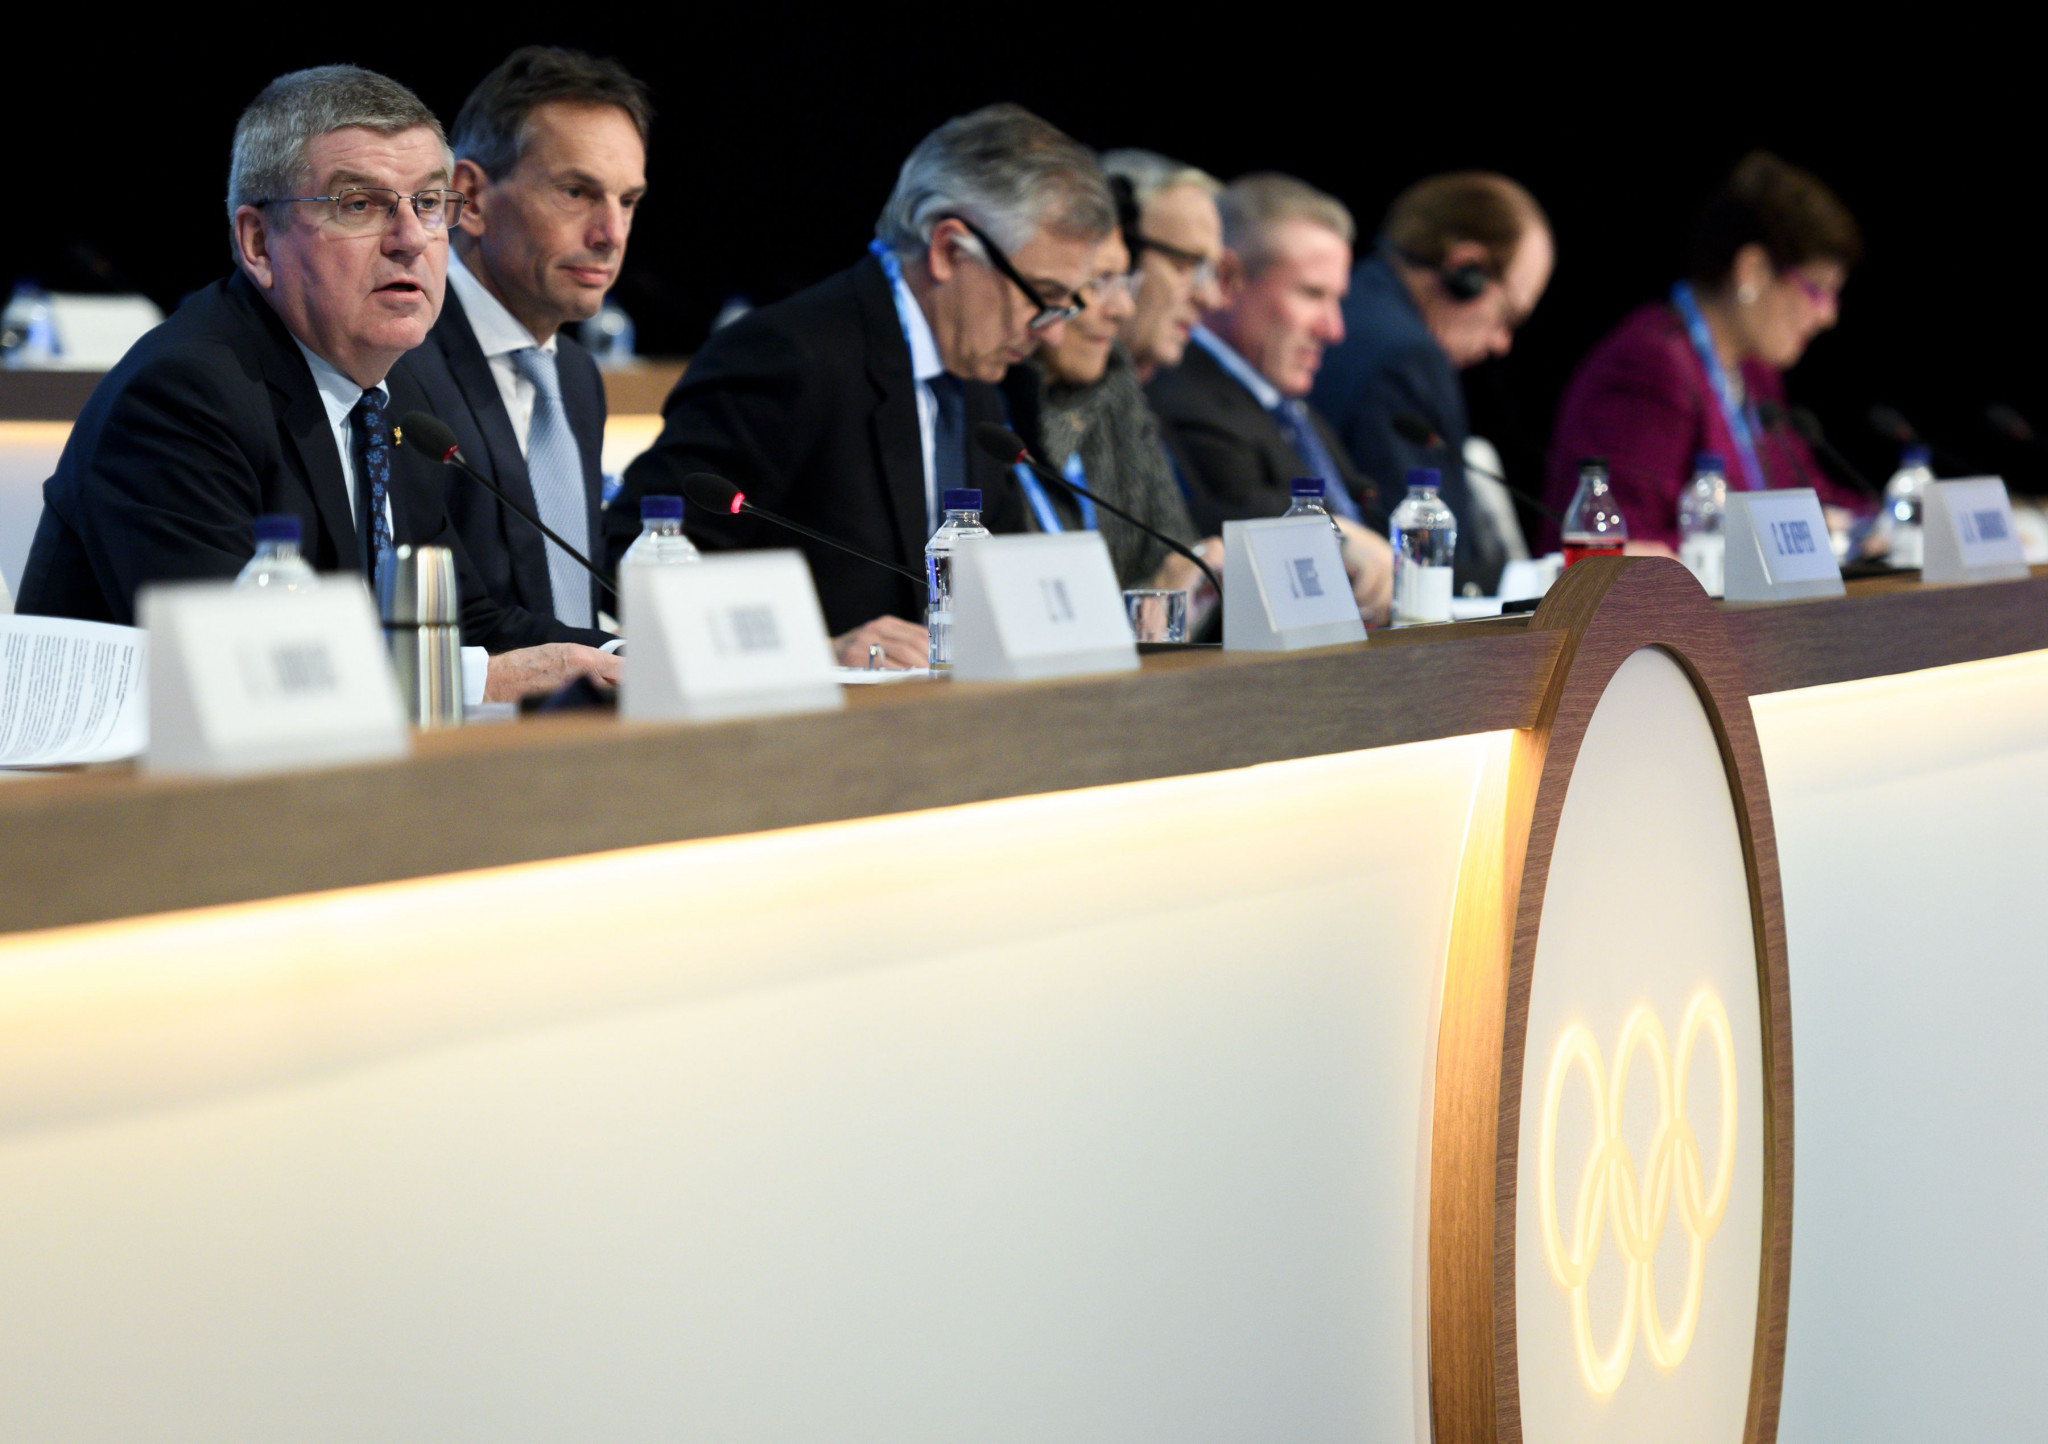 Members of the IOC Executive Board sat at the top table during the IOC Session ©Getty Images